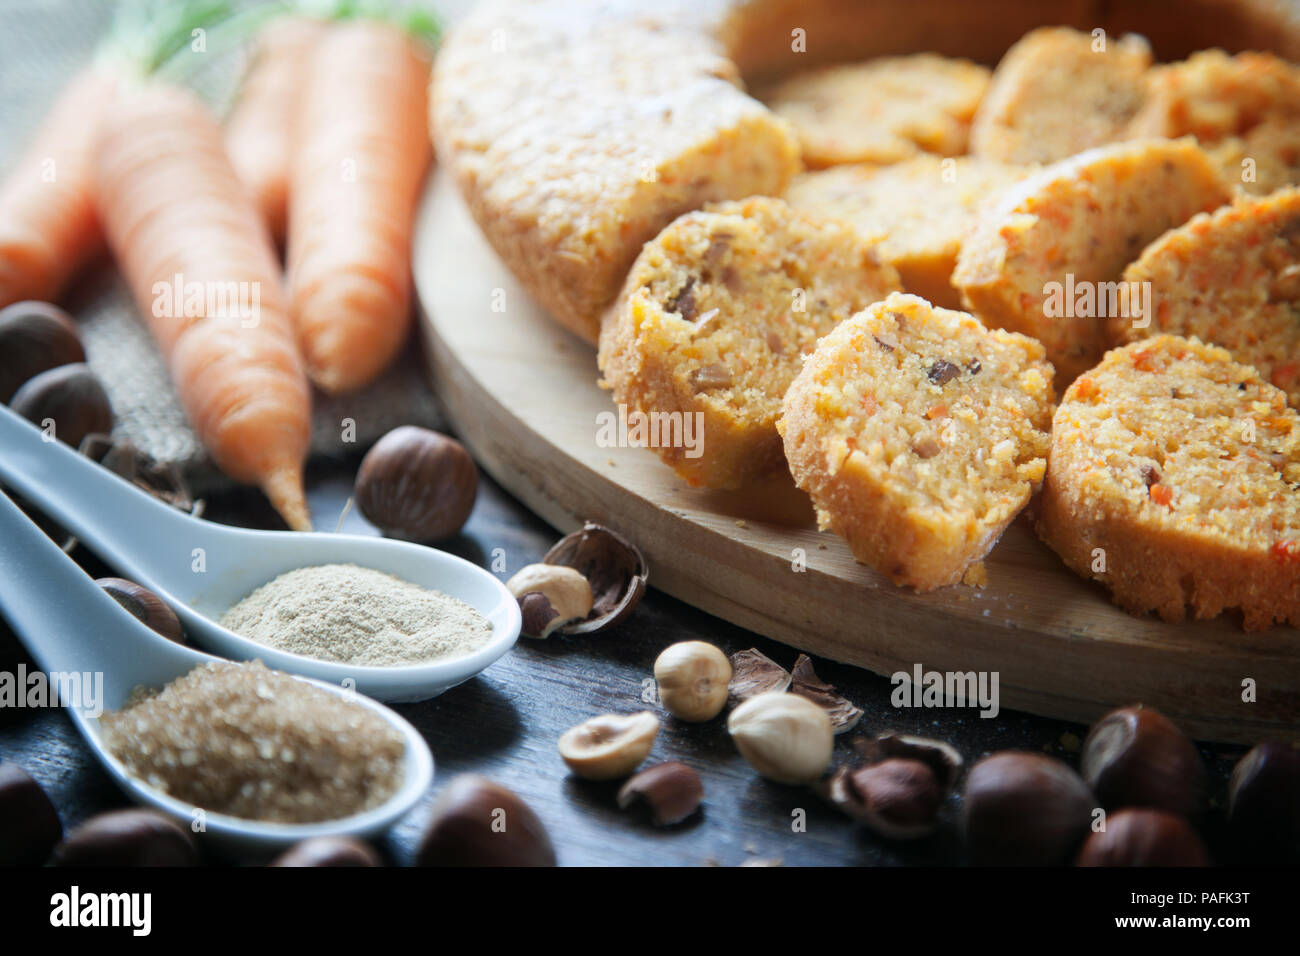 Vegan carrot cake detail with brown sugar and ginger nuts. Stock Photo